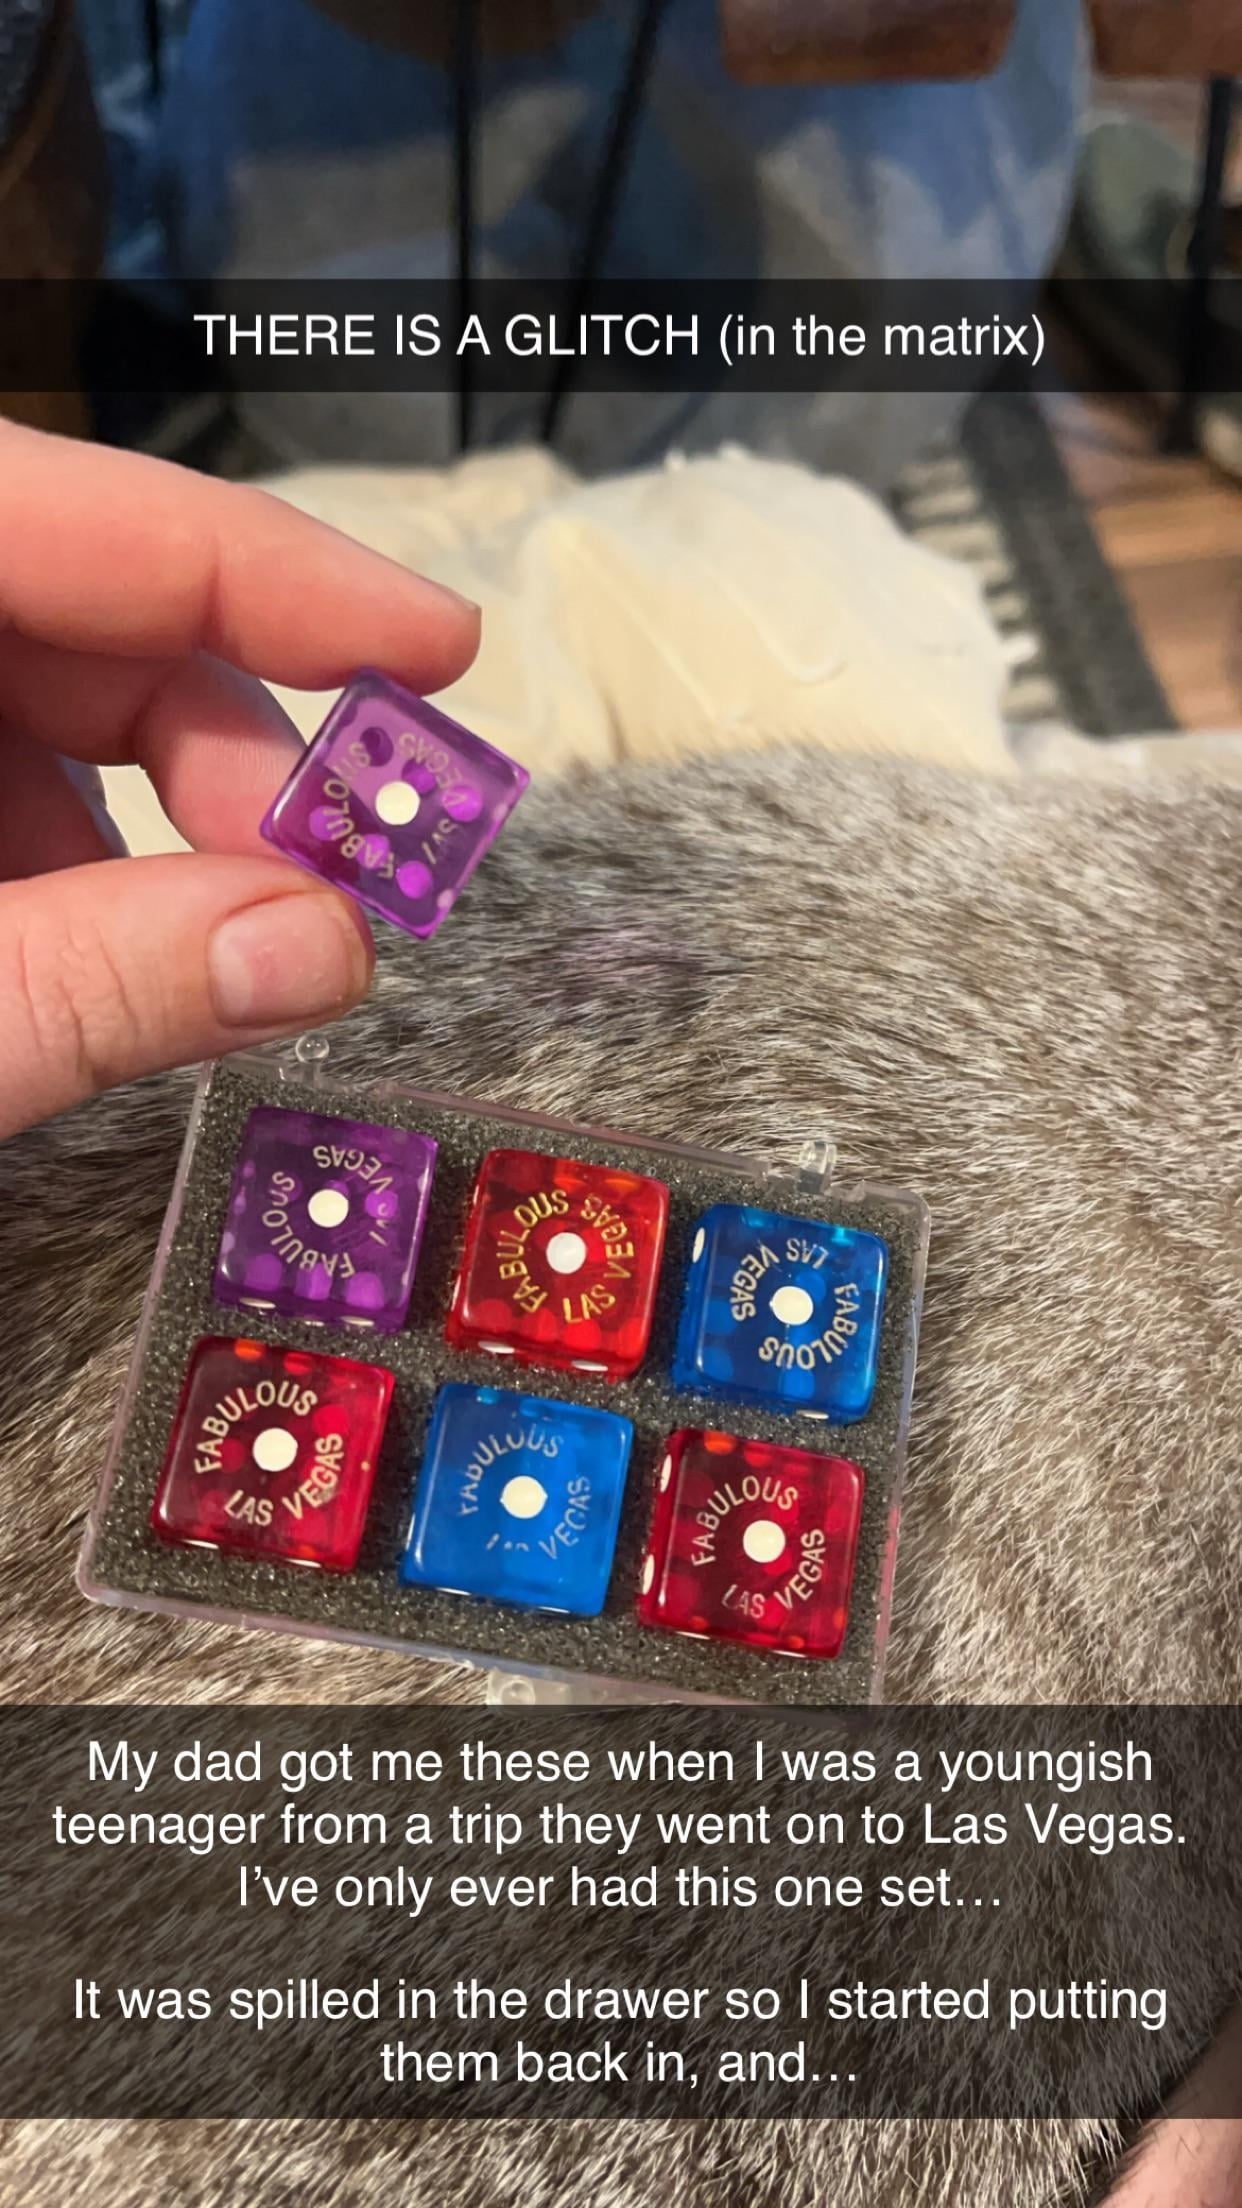 Showing a complete set of six dice with a mysterious seventh dice that does not belong